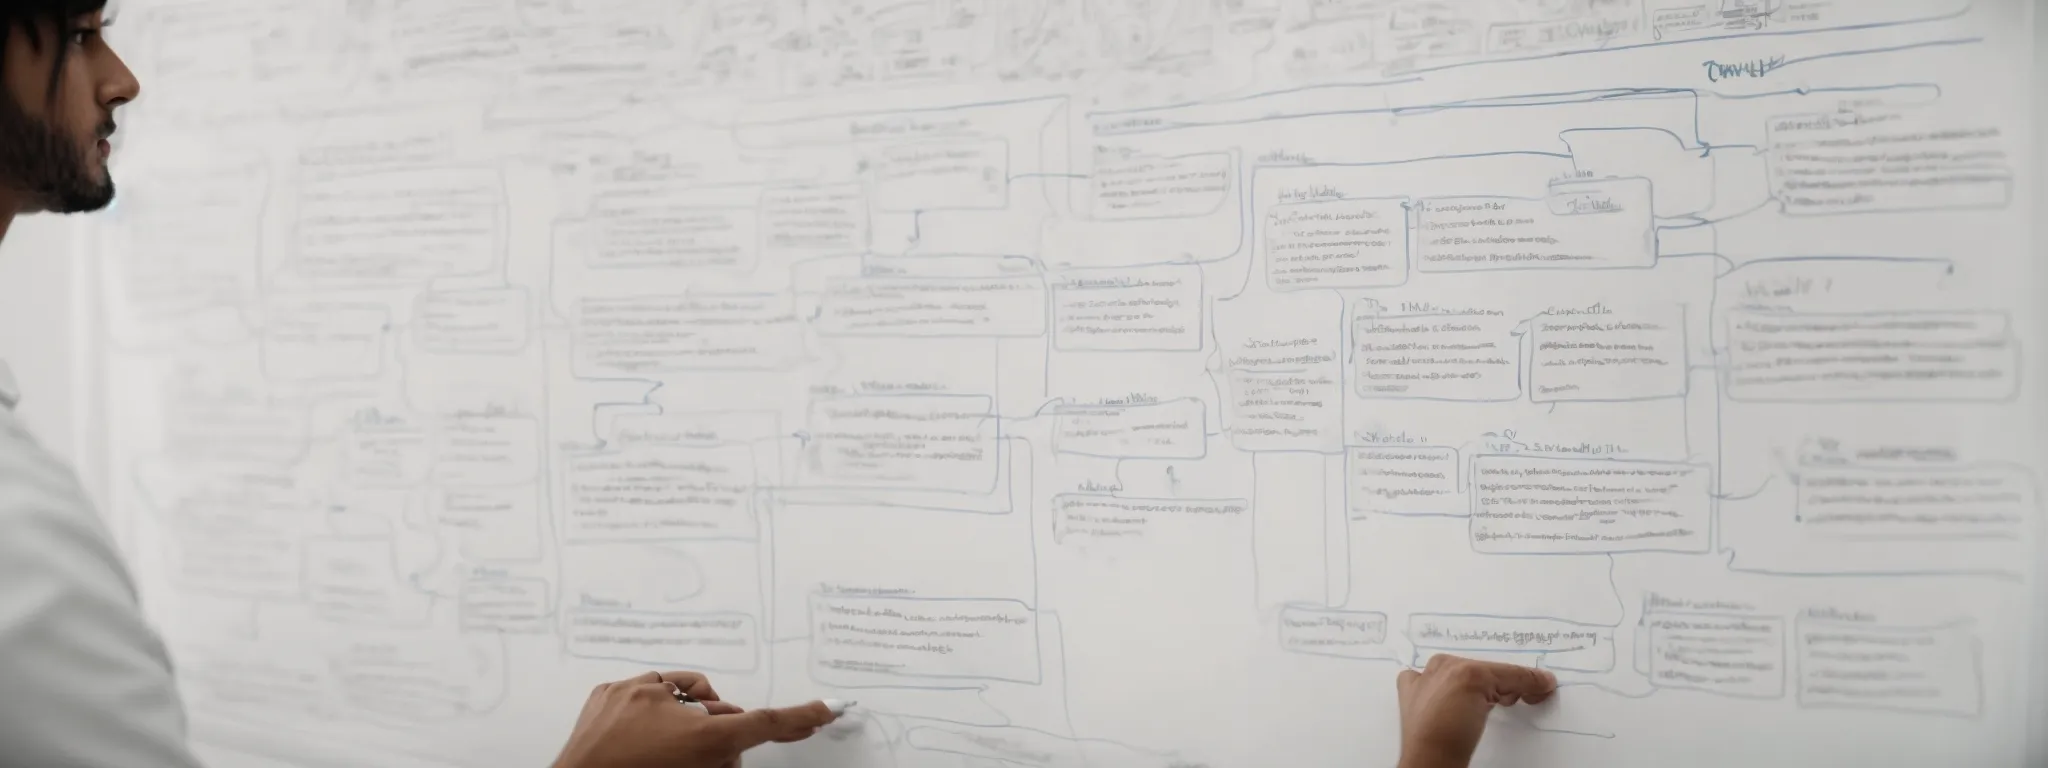 a web designer sketches a flowchart on a whiteboard outlining a website's structure with clear categories and navigation paths.